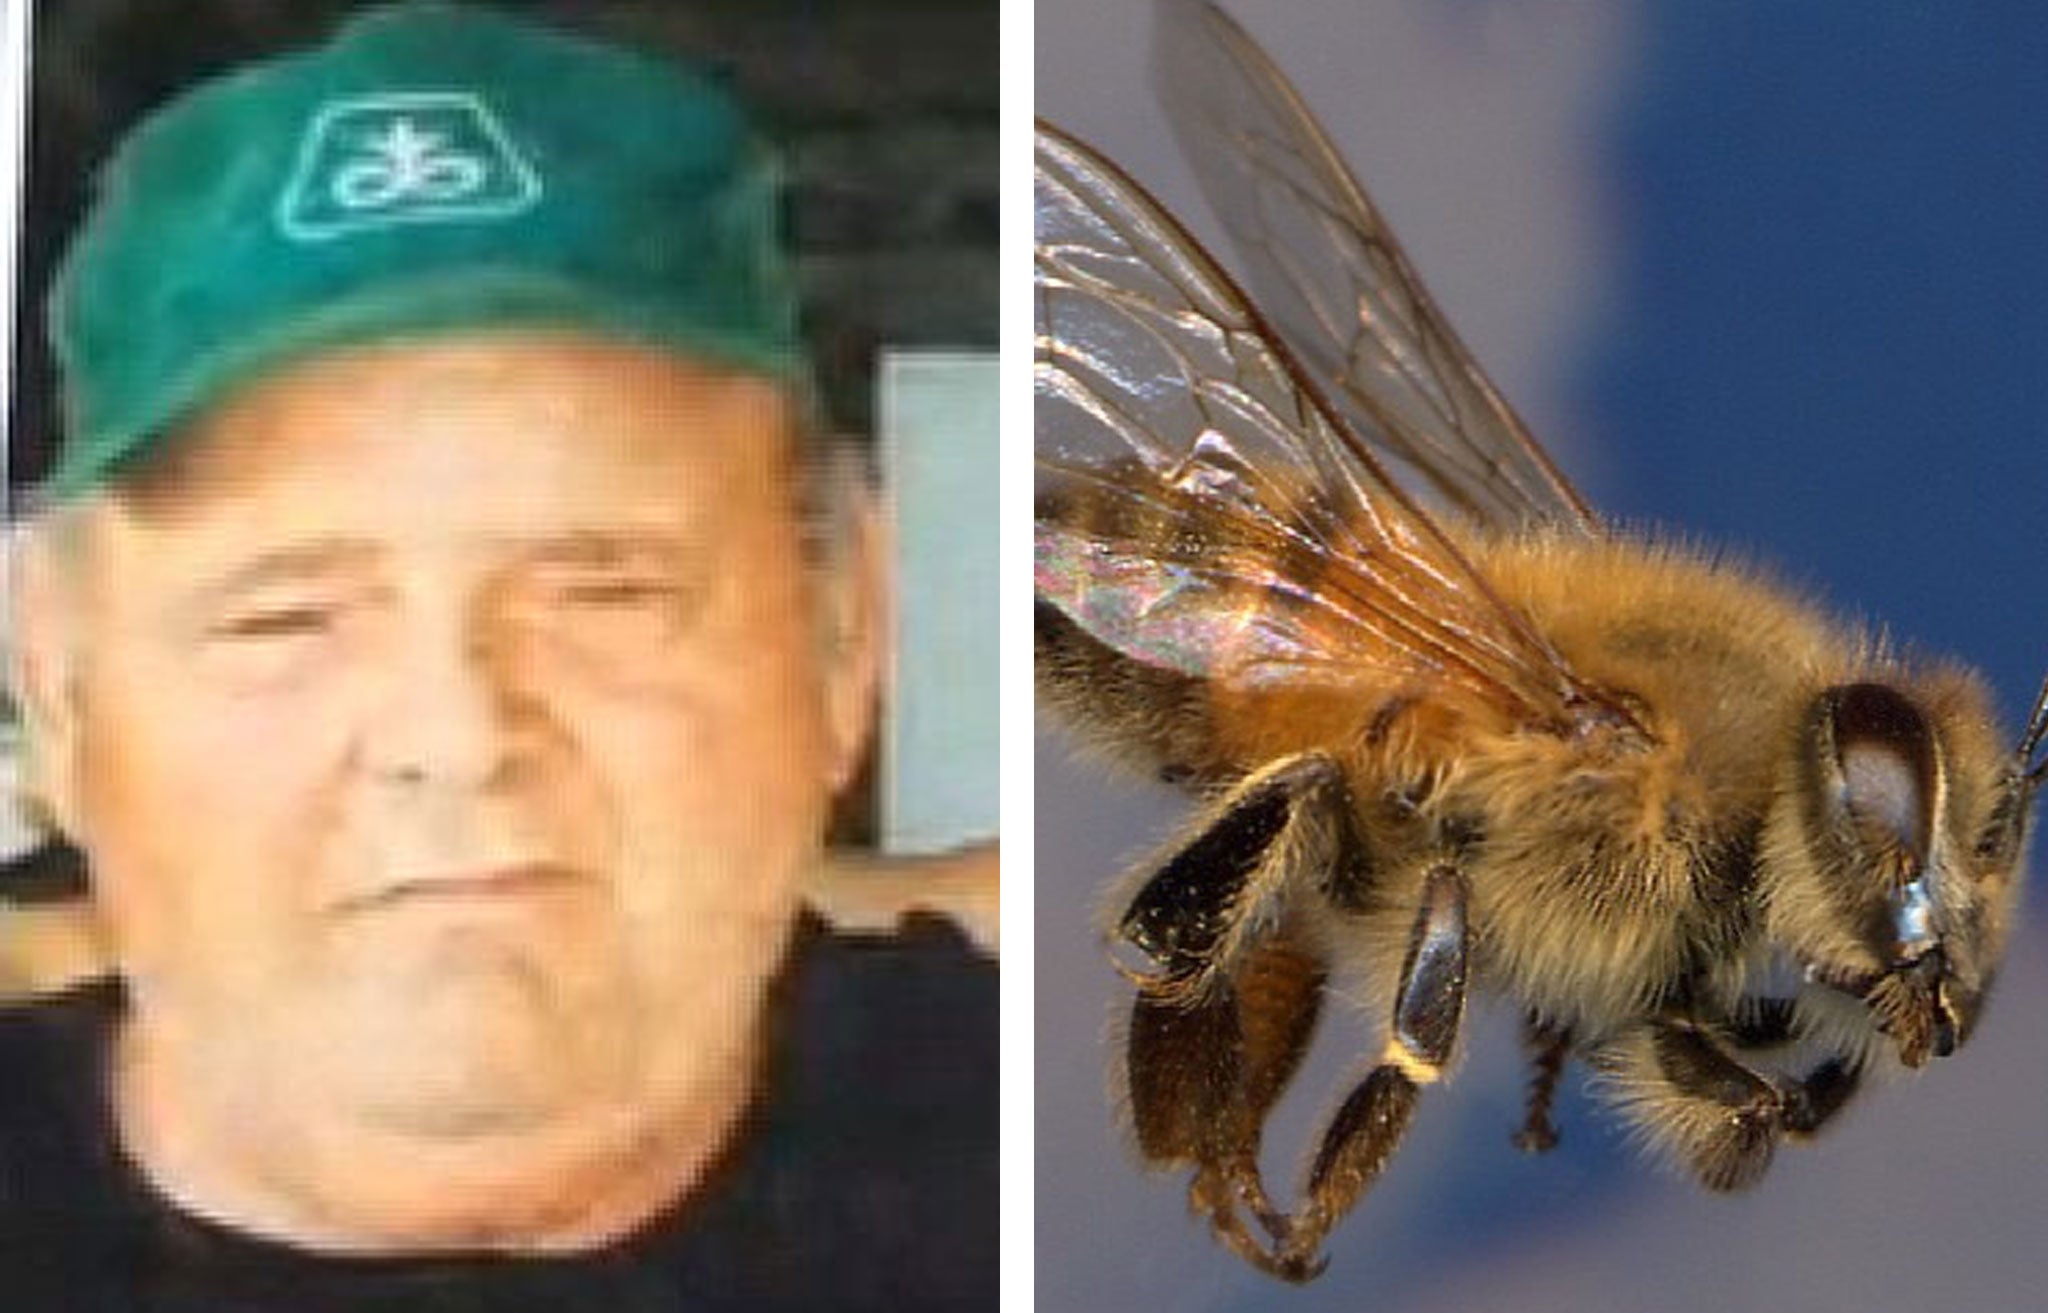 Every inch of his skin was stung Texan farmer killed by 40,000 Africanized killer bees after accidentally disturbing massive hive The Independent The Independent